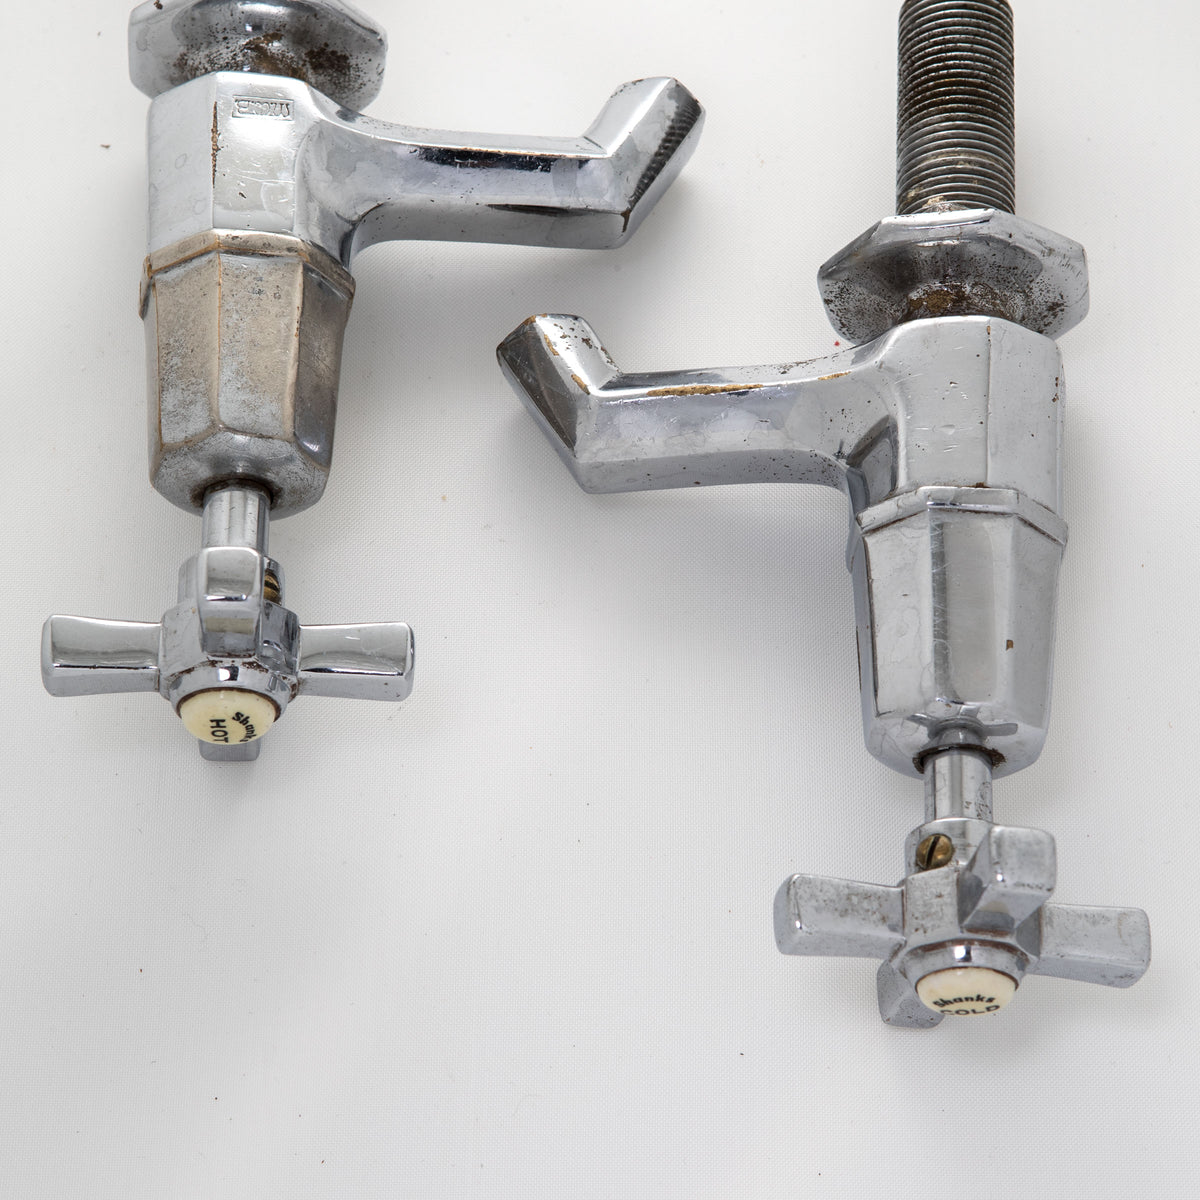 Pair of Reclaimed Art Deco Chrome Taps | The Architectural Forum